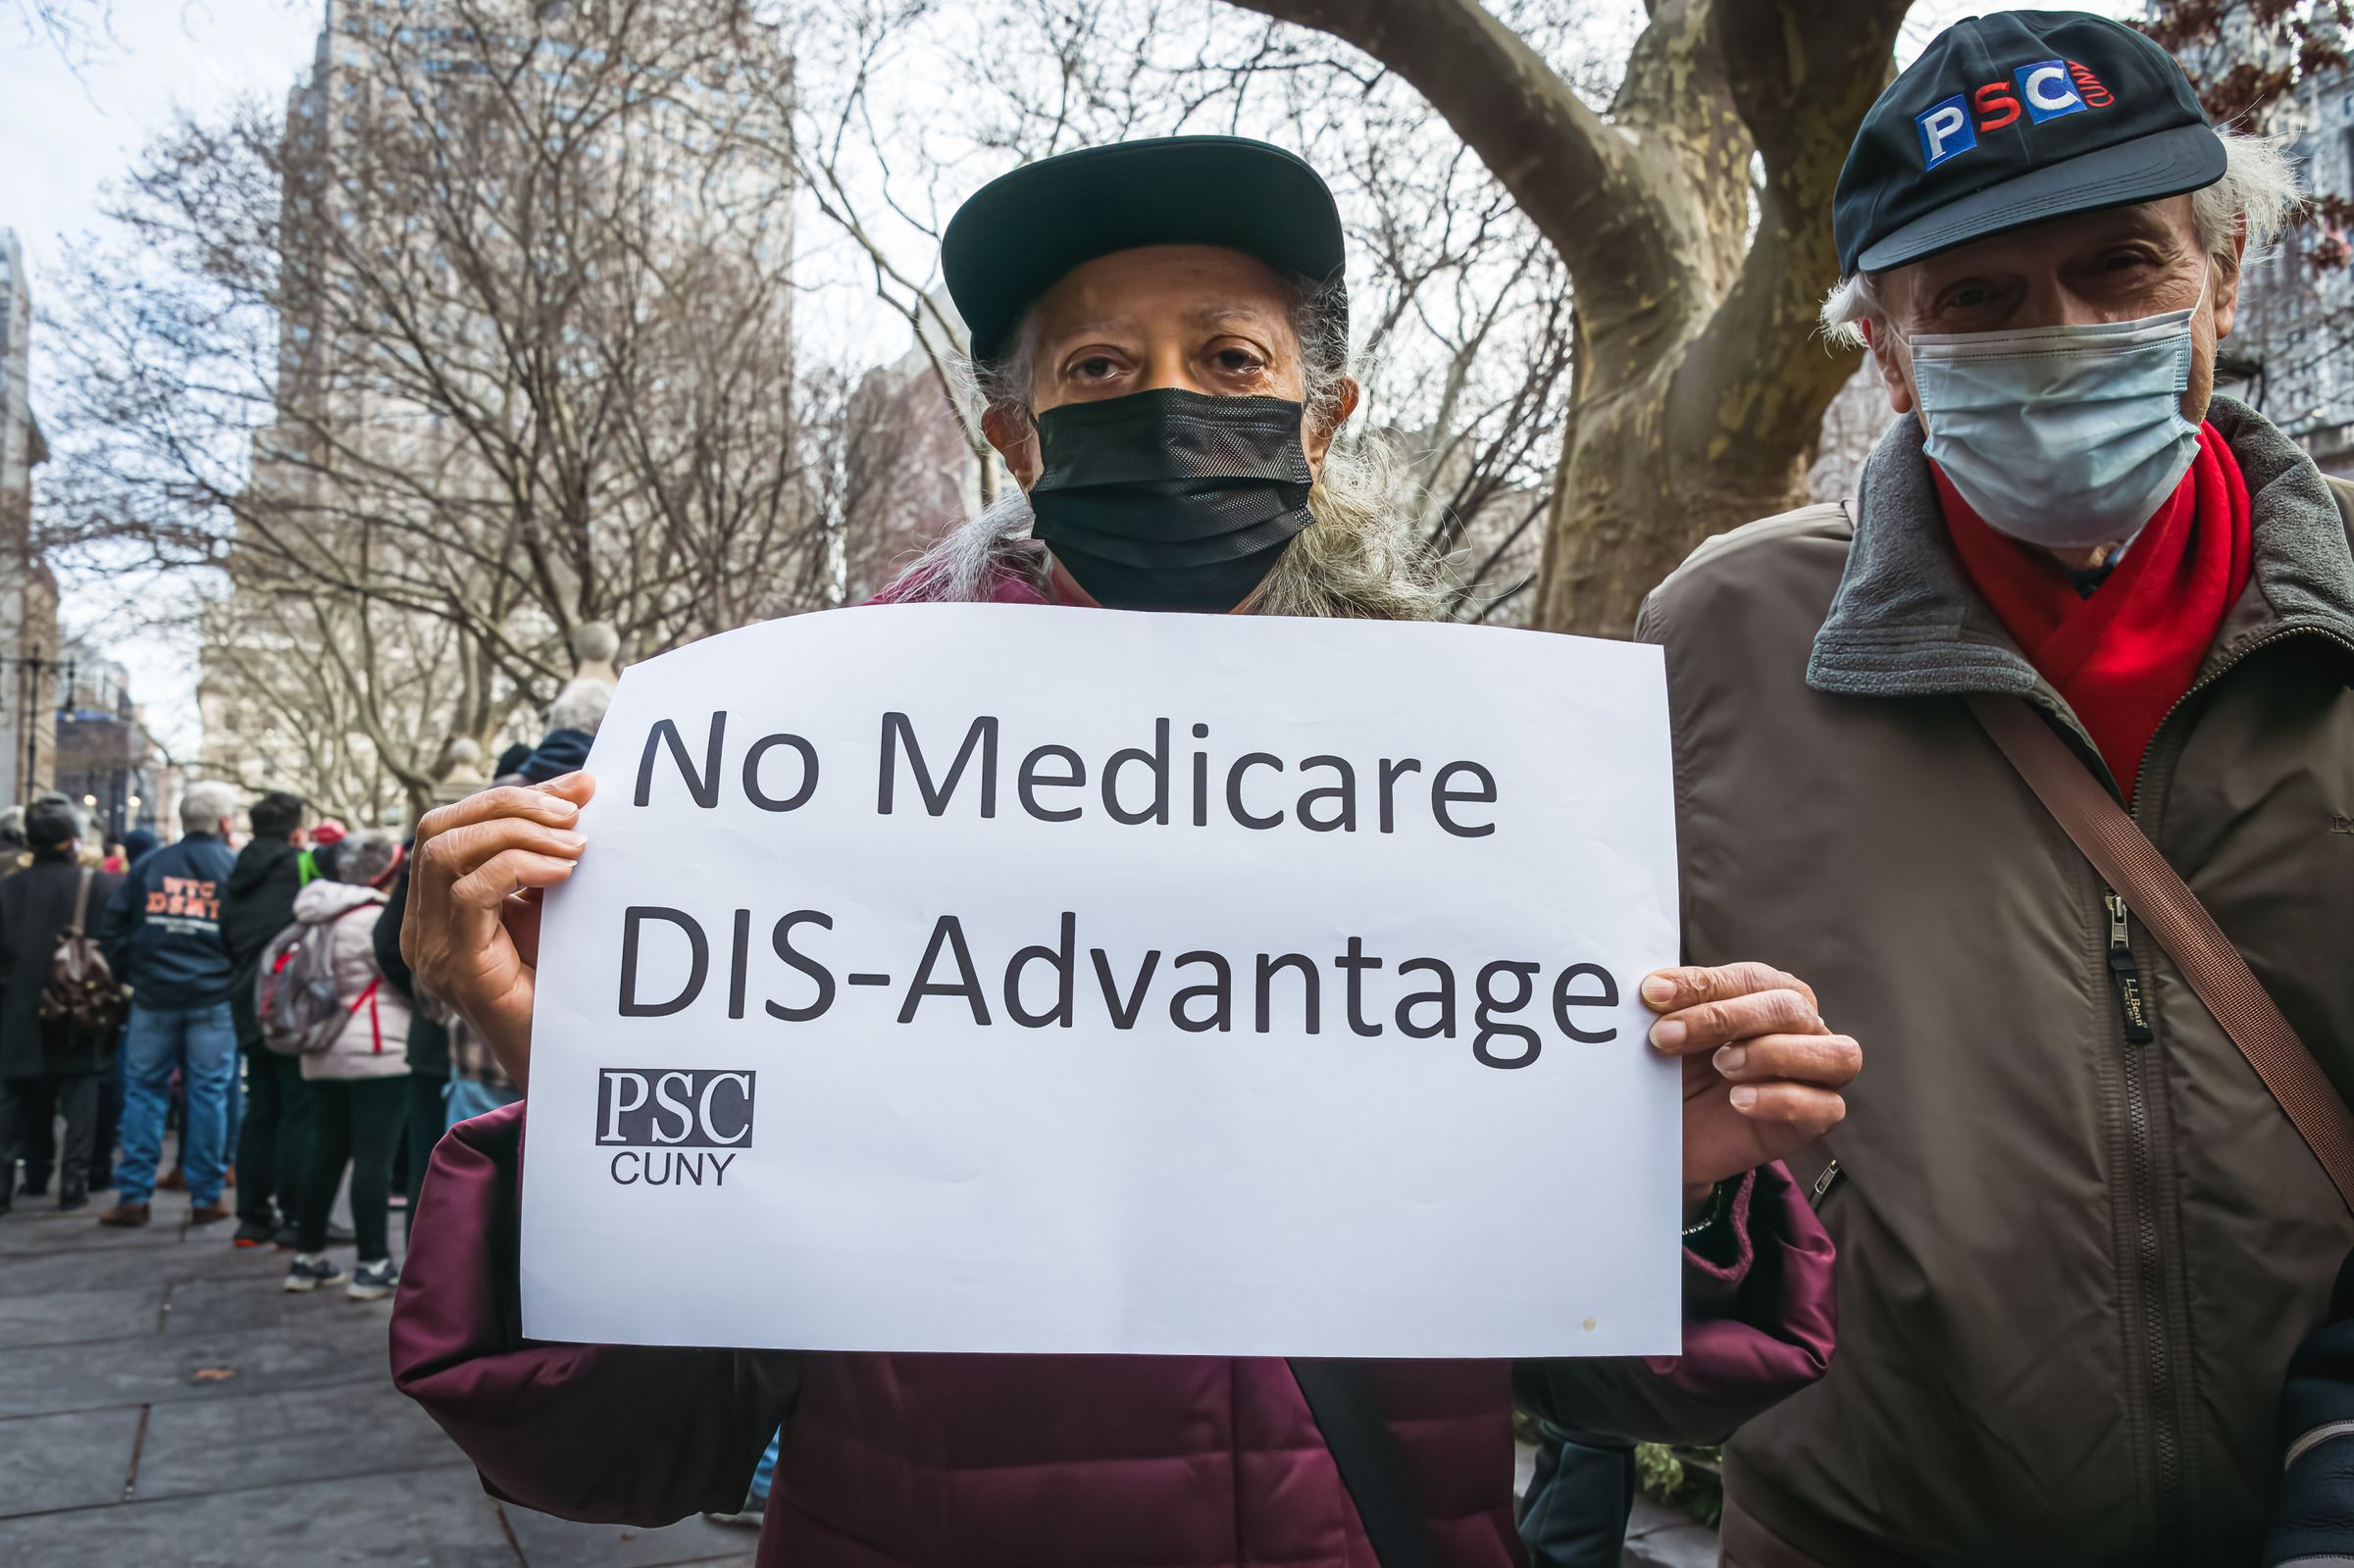 Demonstrator with mask holding sign reading “No Medicare Dis-Advantage.”